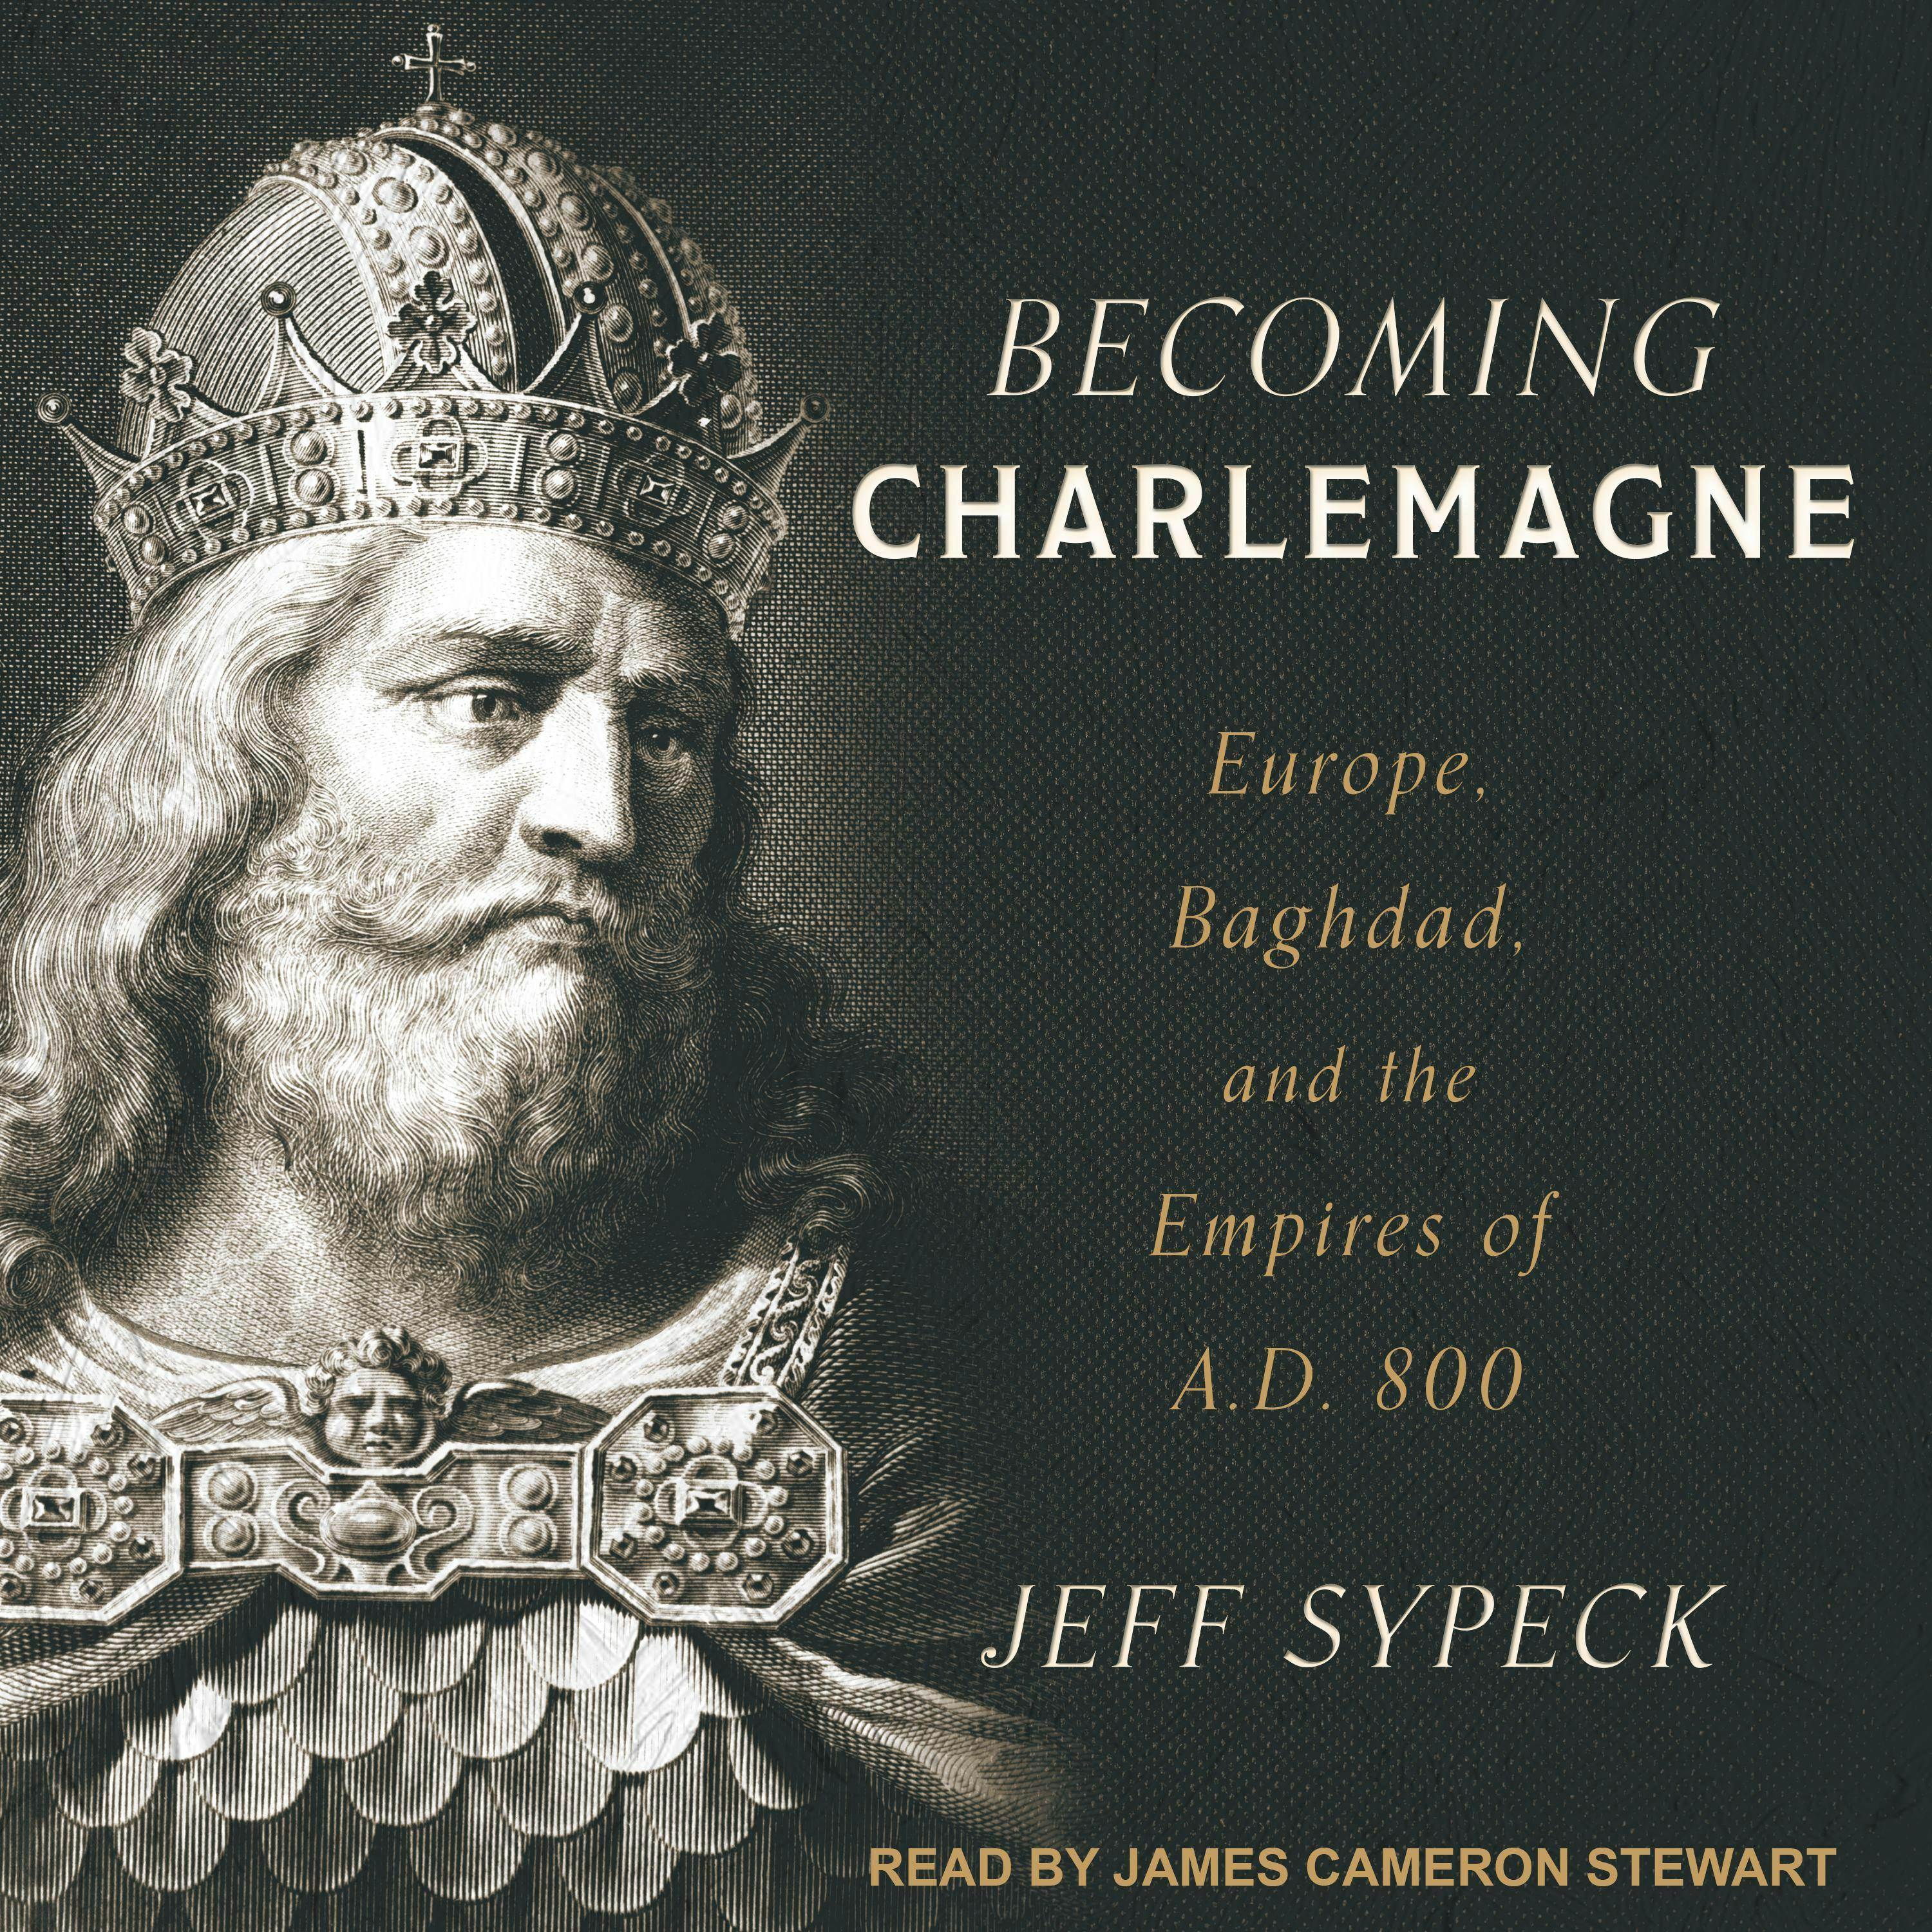 Becoming Charlemagne: Europe, Baghdad, and the Empires of A.D. 800 - Jeff Sypeck